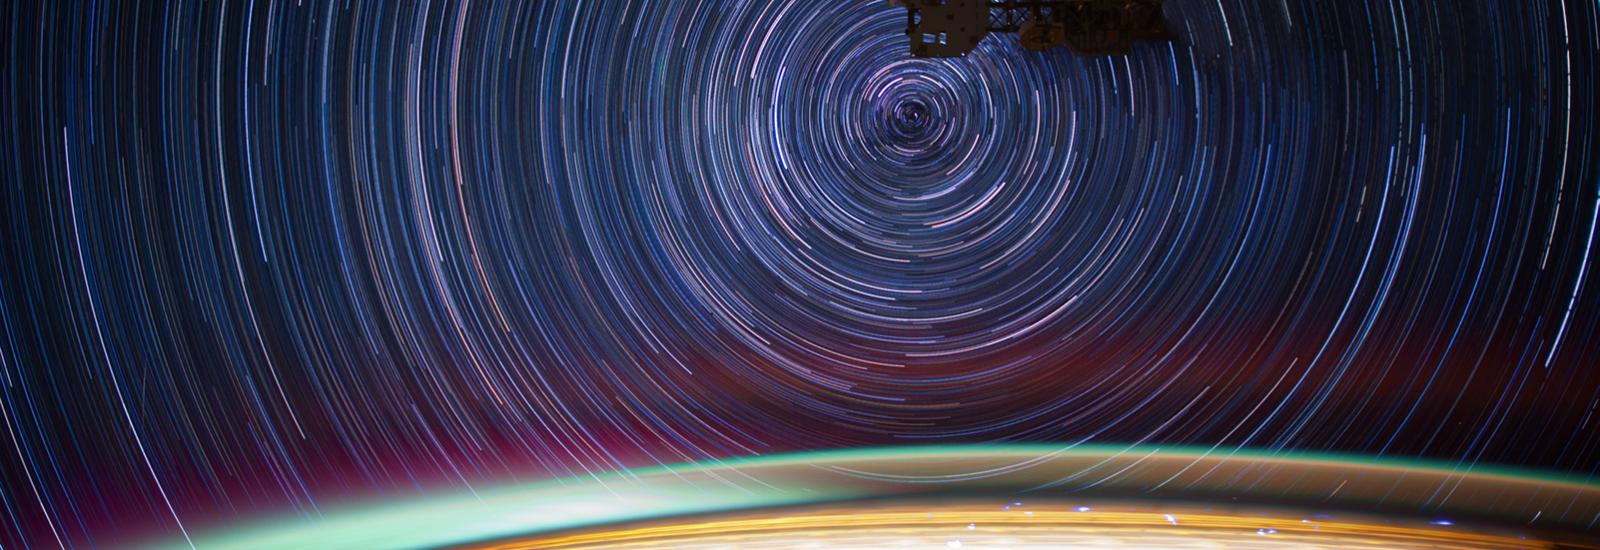 Star trails from the International Space Station